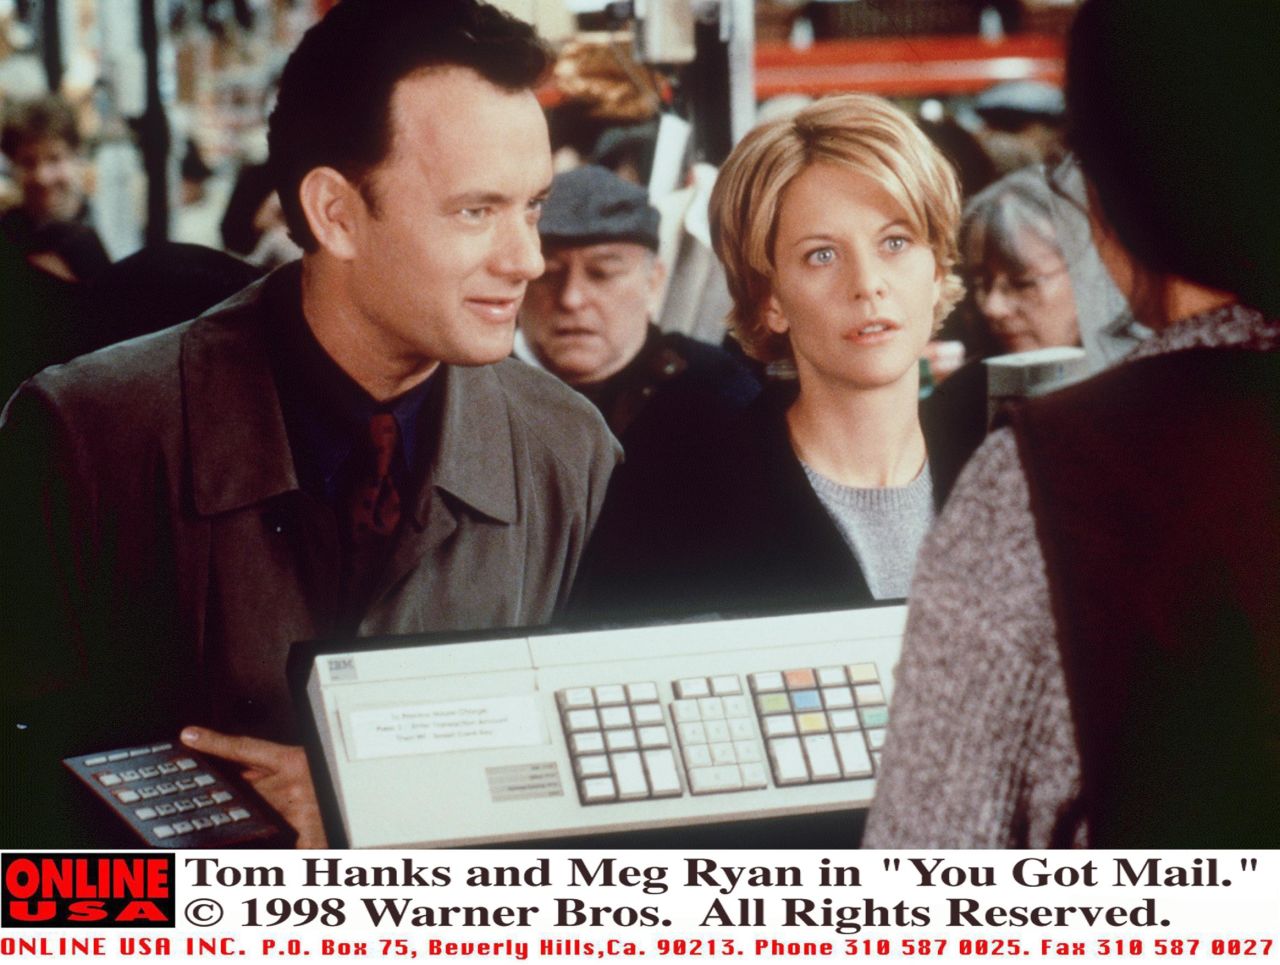 Ephron co-wrote "You've Got Mail," featuring Tom Hanks and Meg Ryan, with her sister Nora.